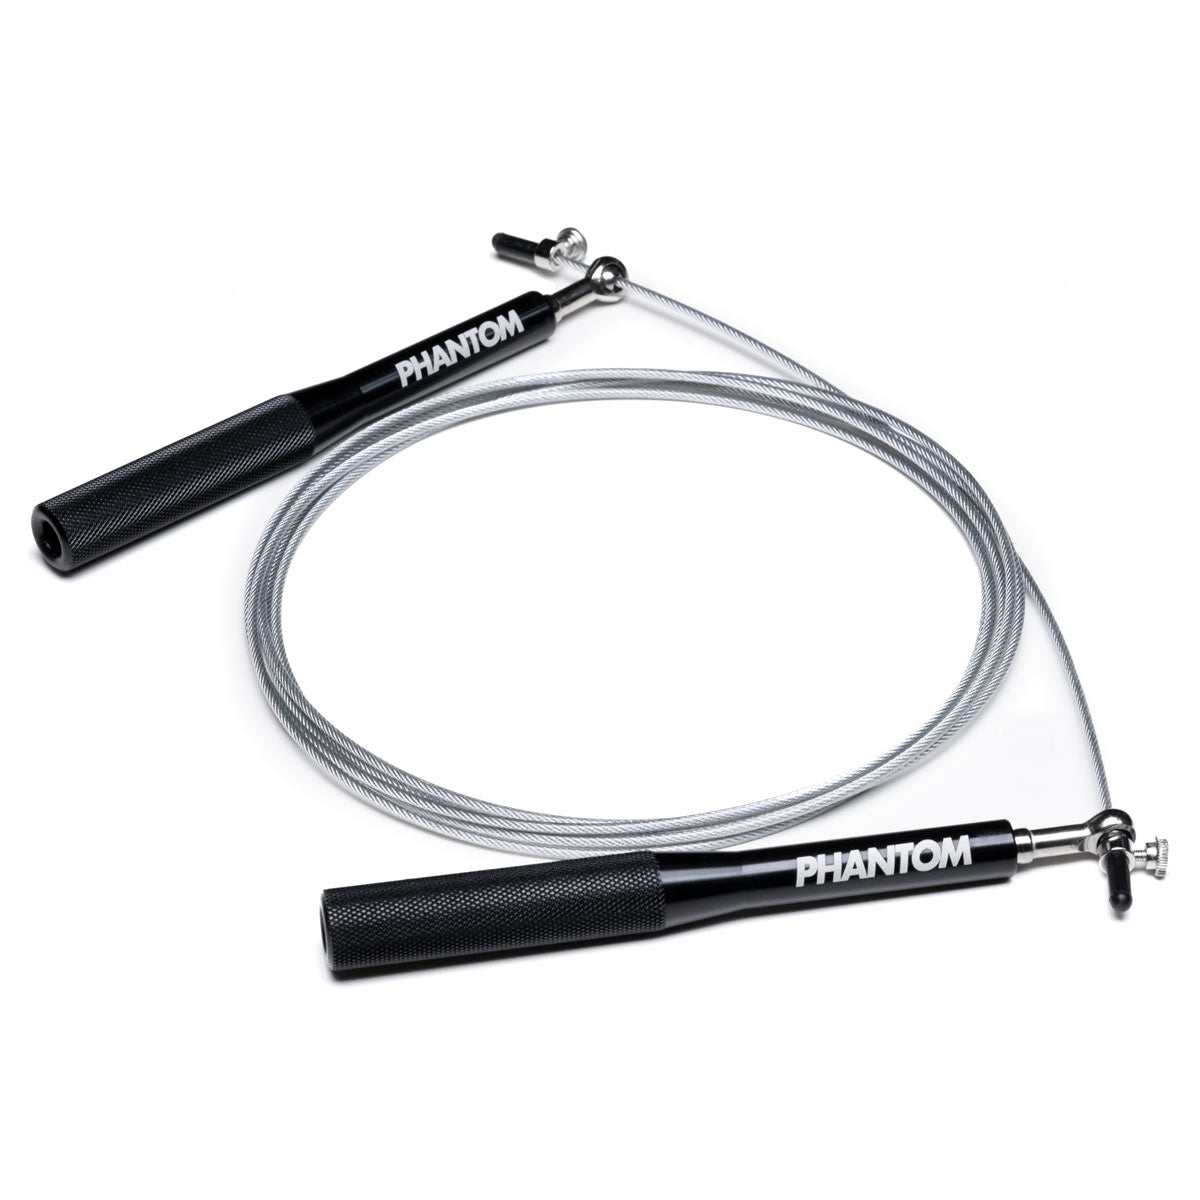 Phantom professional performance skipping rope for martial arts and crossfit. Excellent quality and workmanship. 